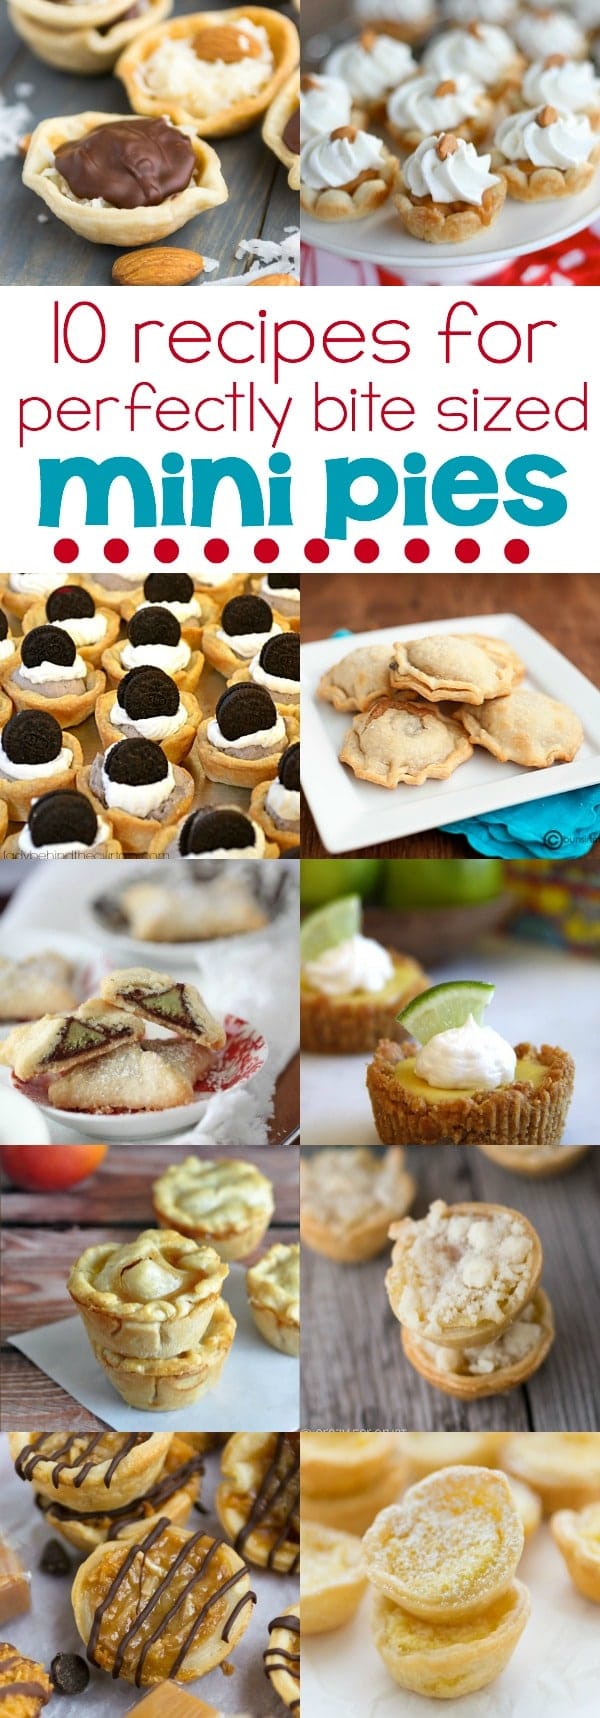 10 recipes for perfectly bite sized mini pies